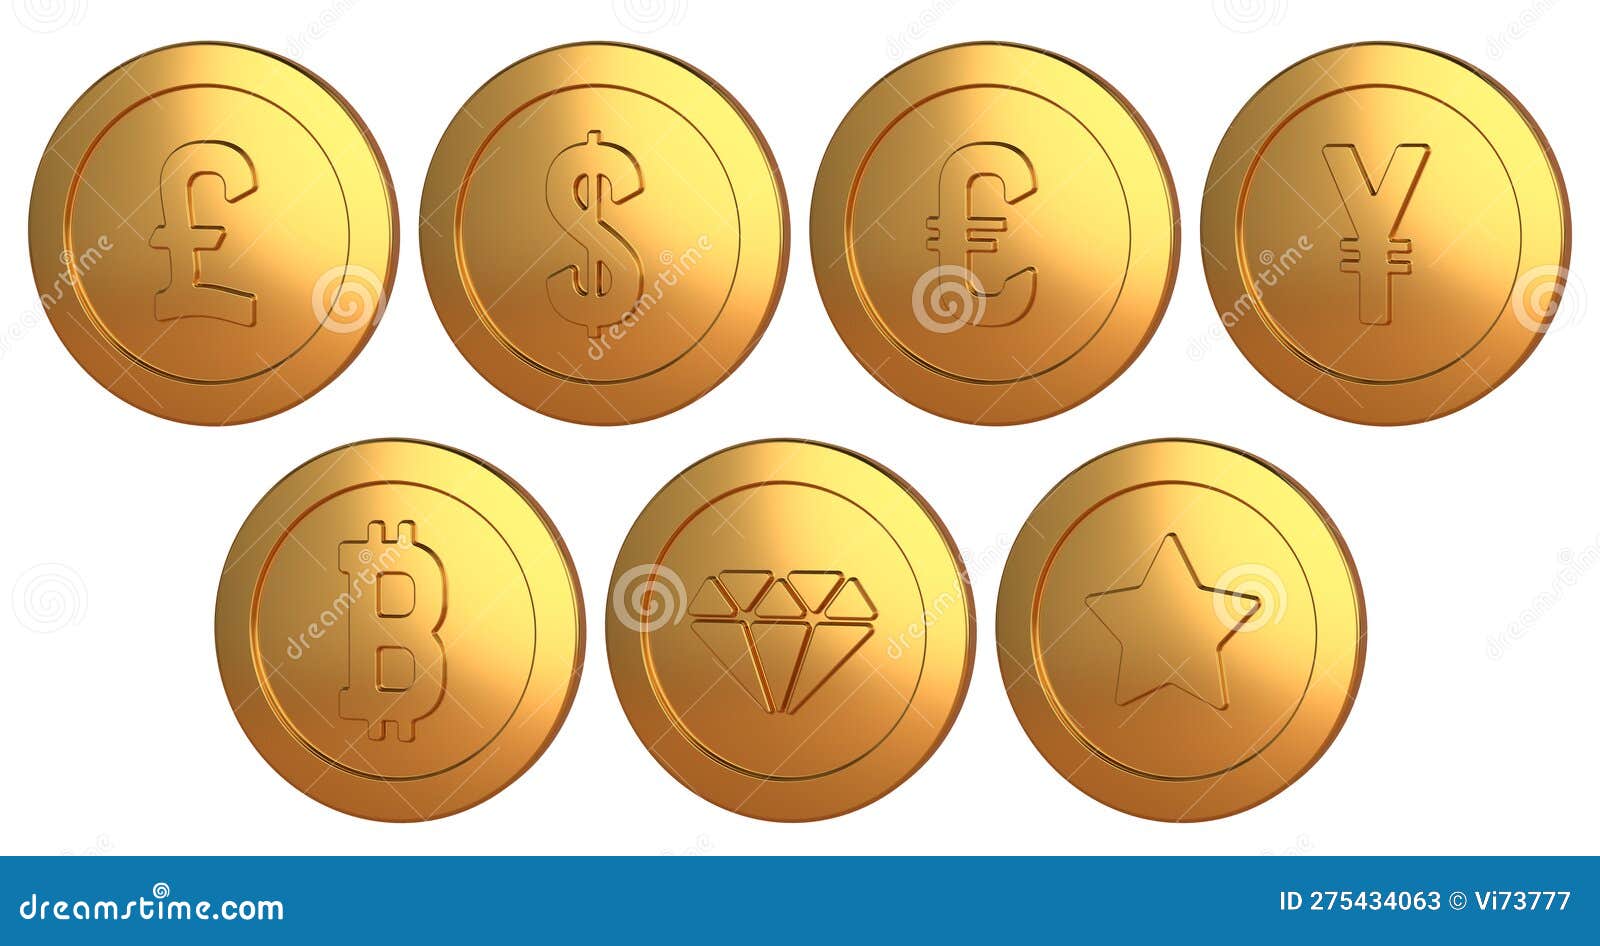 Golden coins with currencies symbols. Elements for currency exchange design. 3D rendered image.